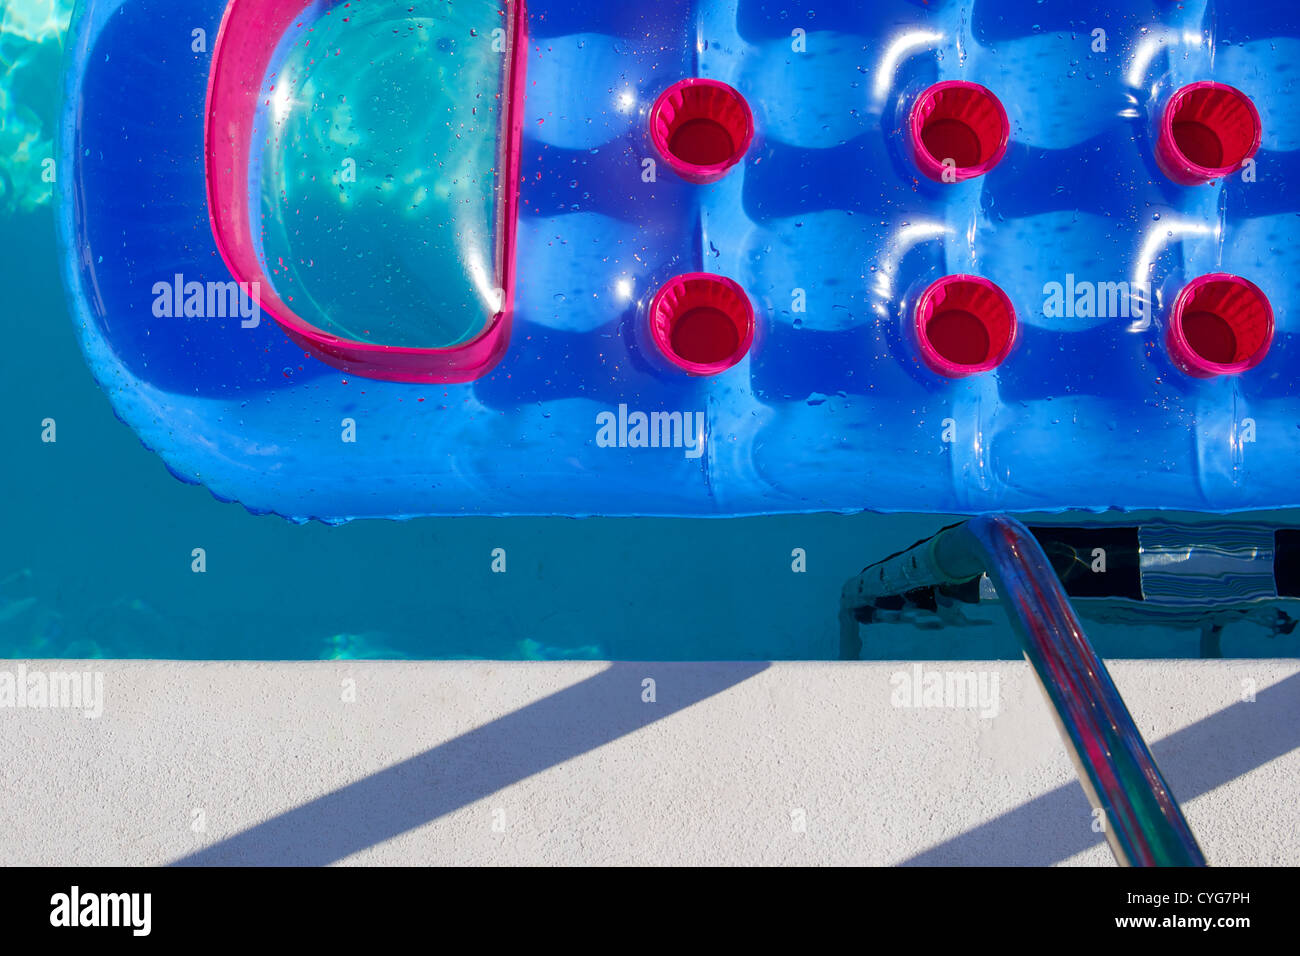 Abstract image - Blue & red inflatable mattress floating pool side. Stock Photo